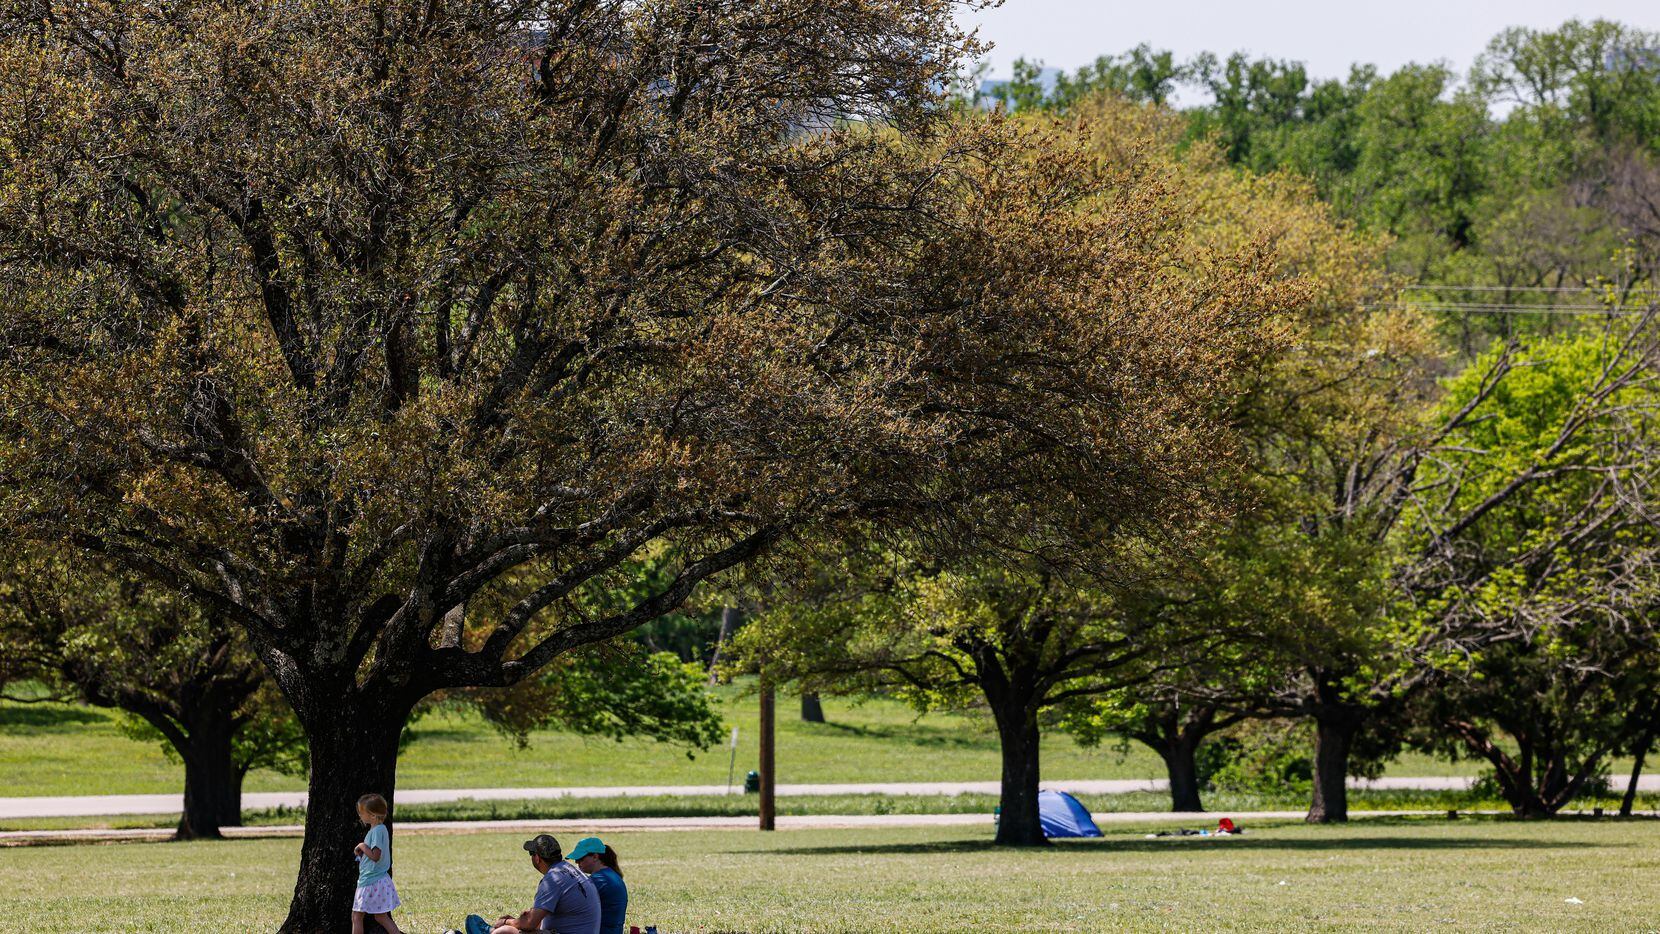 Tree scape at the Flag Pole Hill Park in Dallas on Monday, April 18, 2022.